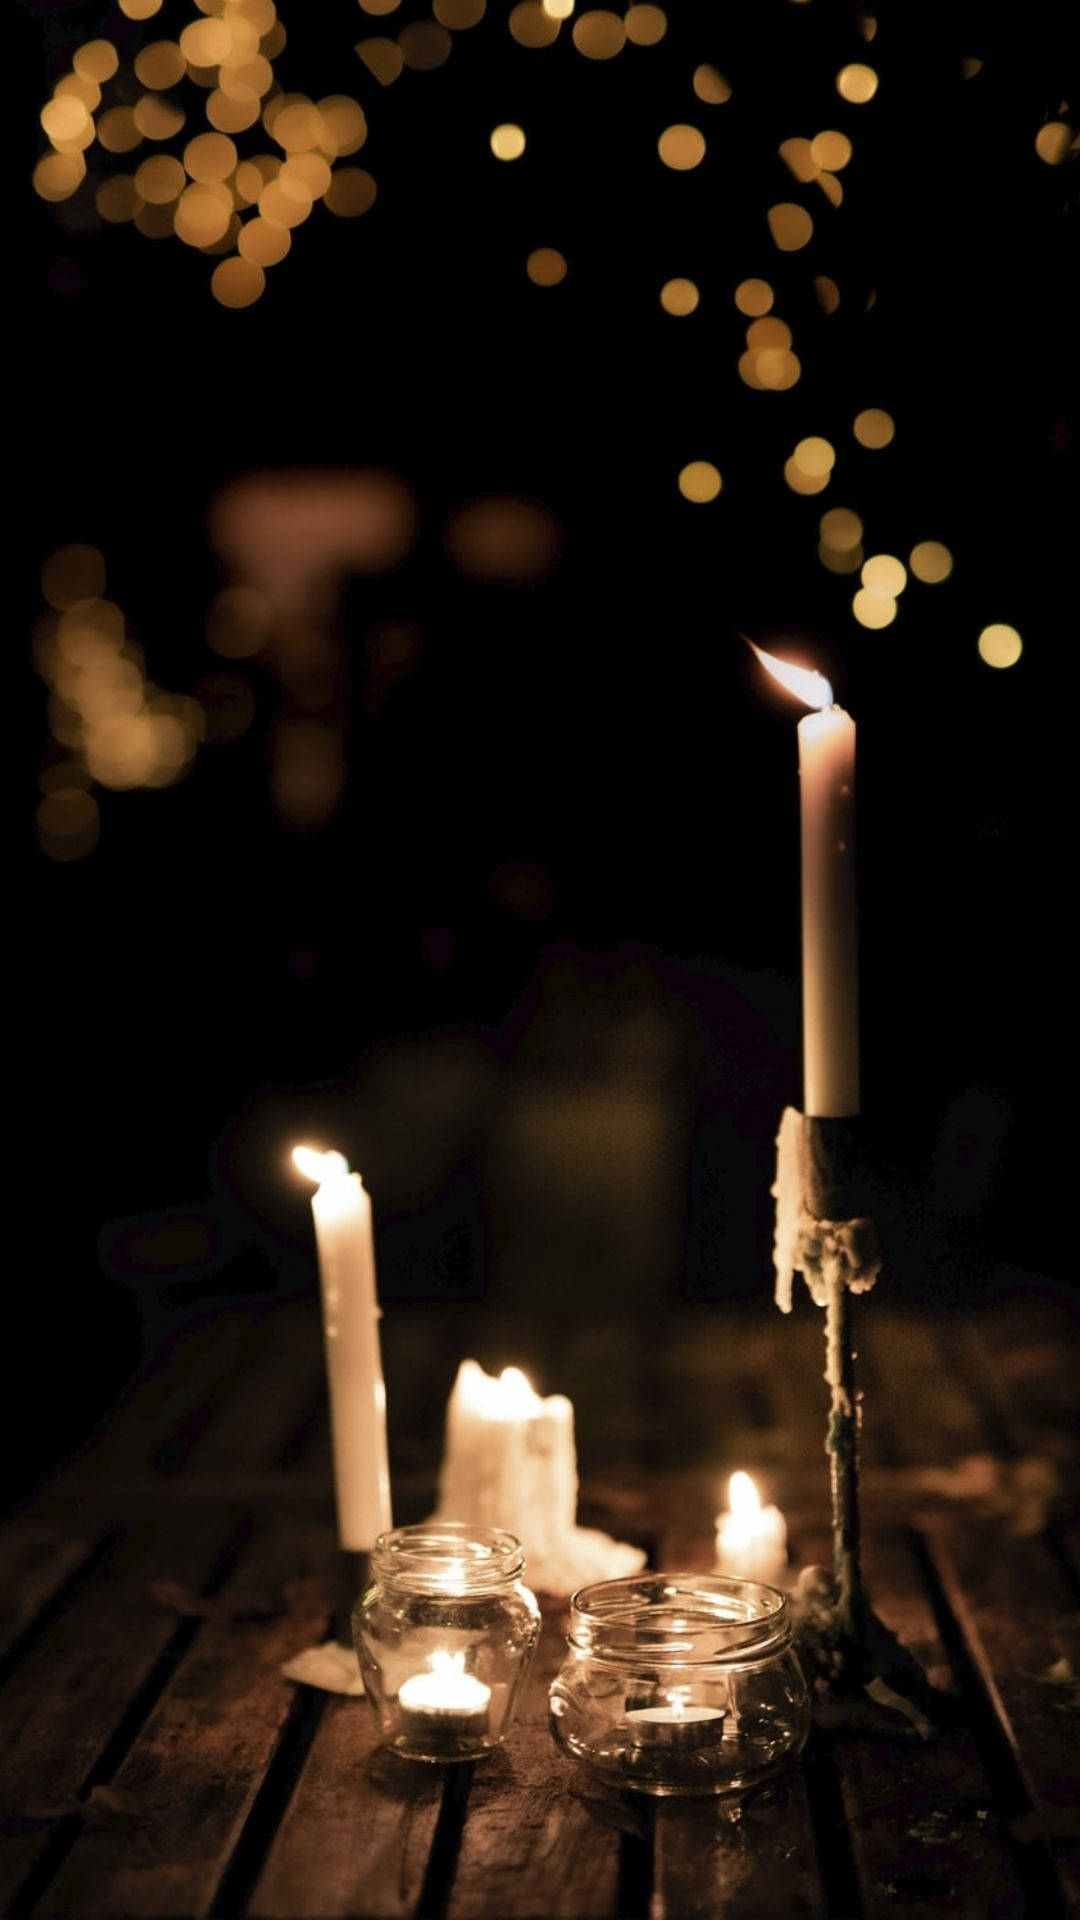 Glowing Candles In The Dark Background